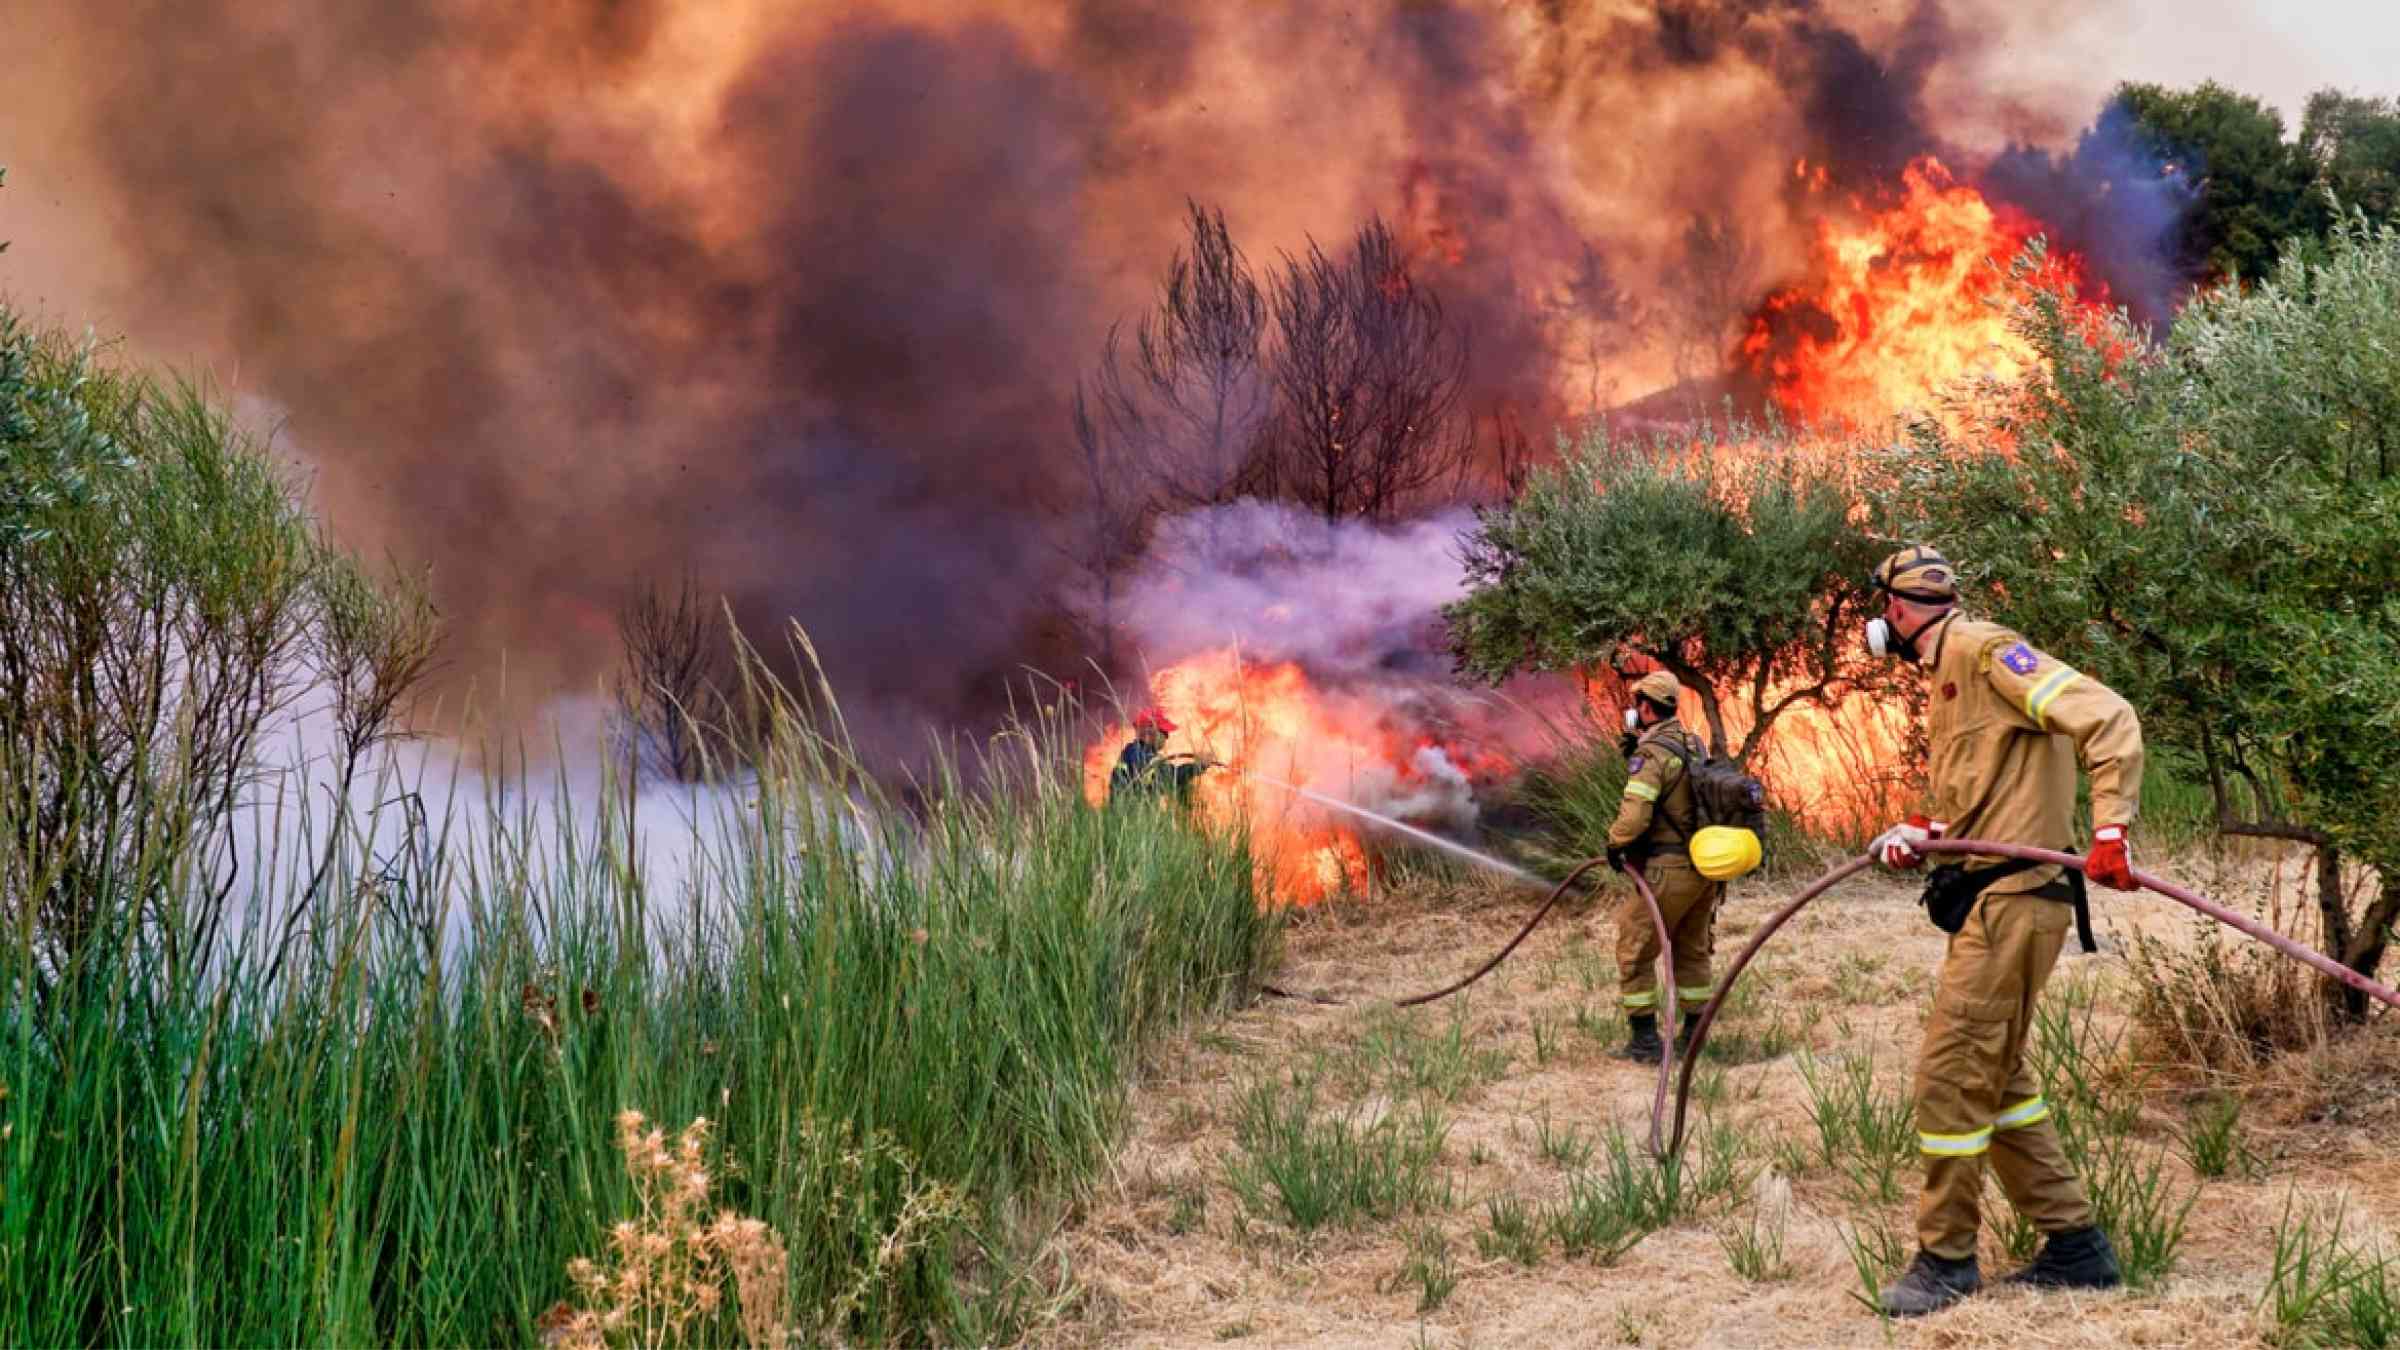 Firefighters battle to extinguish a wildfire in Peloponnese, Greece (2021)